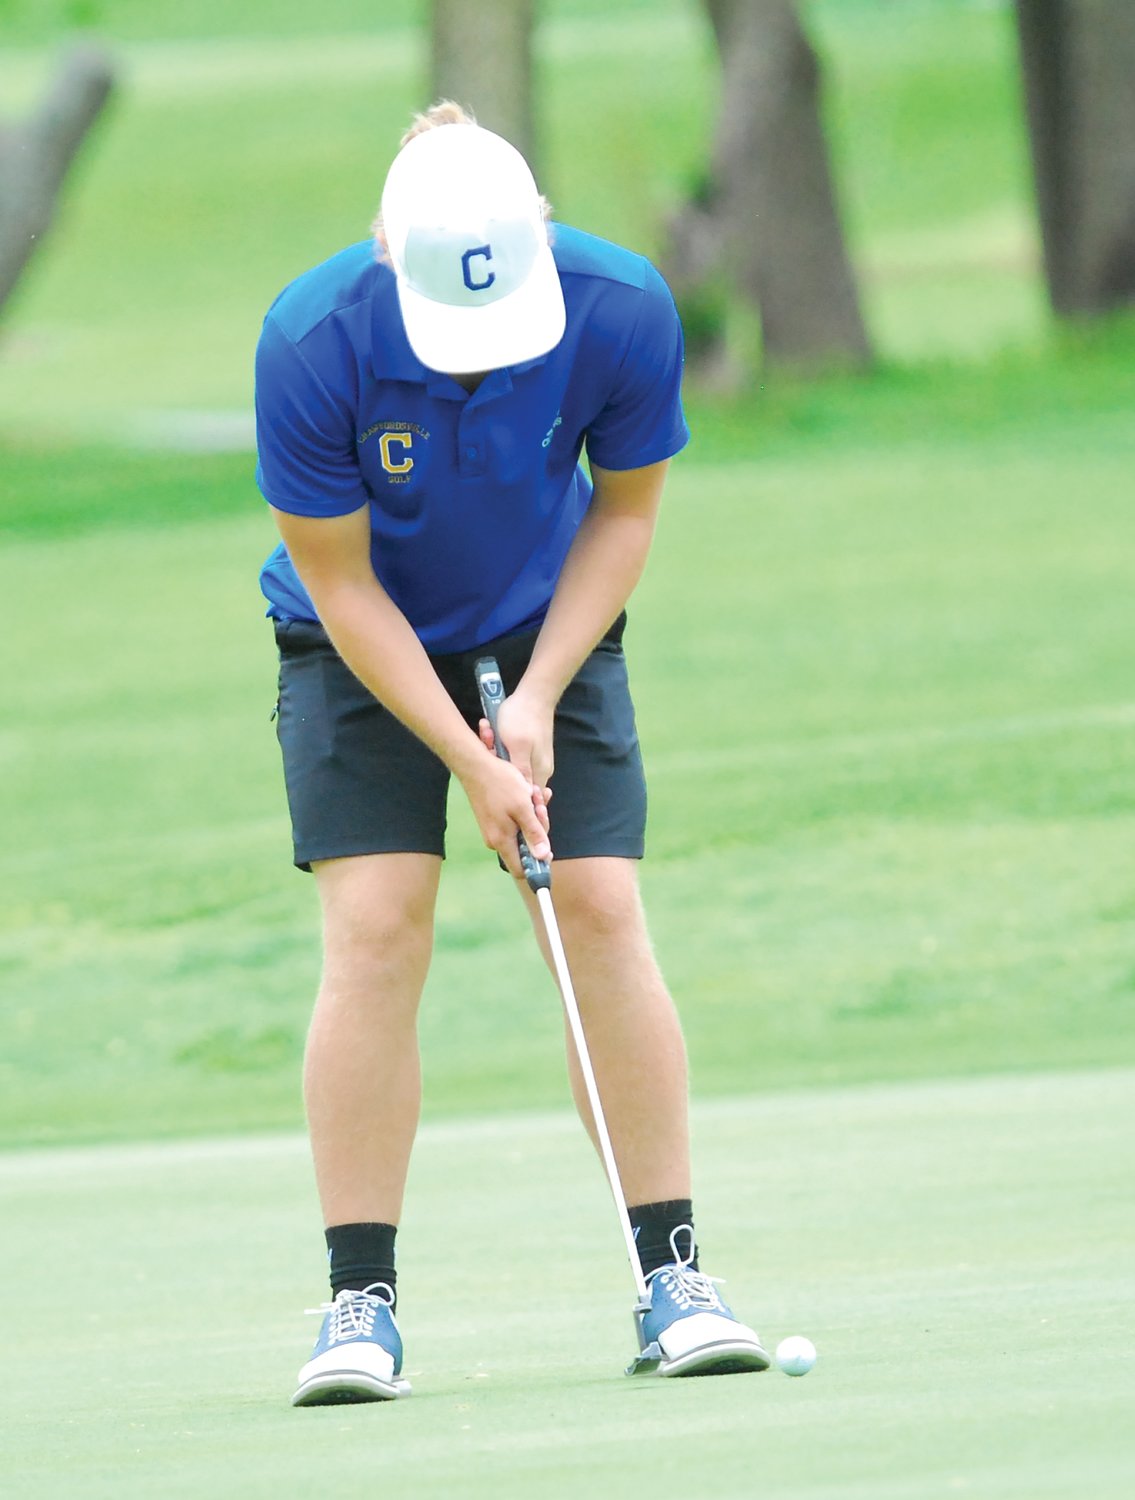 Crawfordsville's Landon Timmons made second-team all-conference with a round of 90.